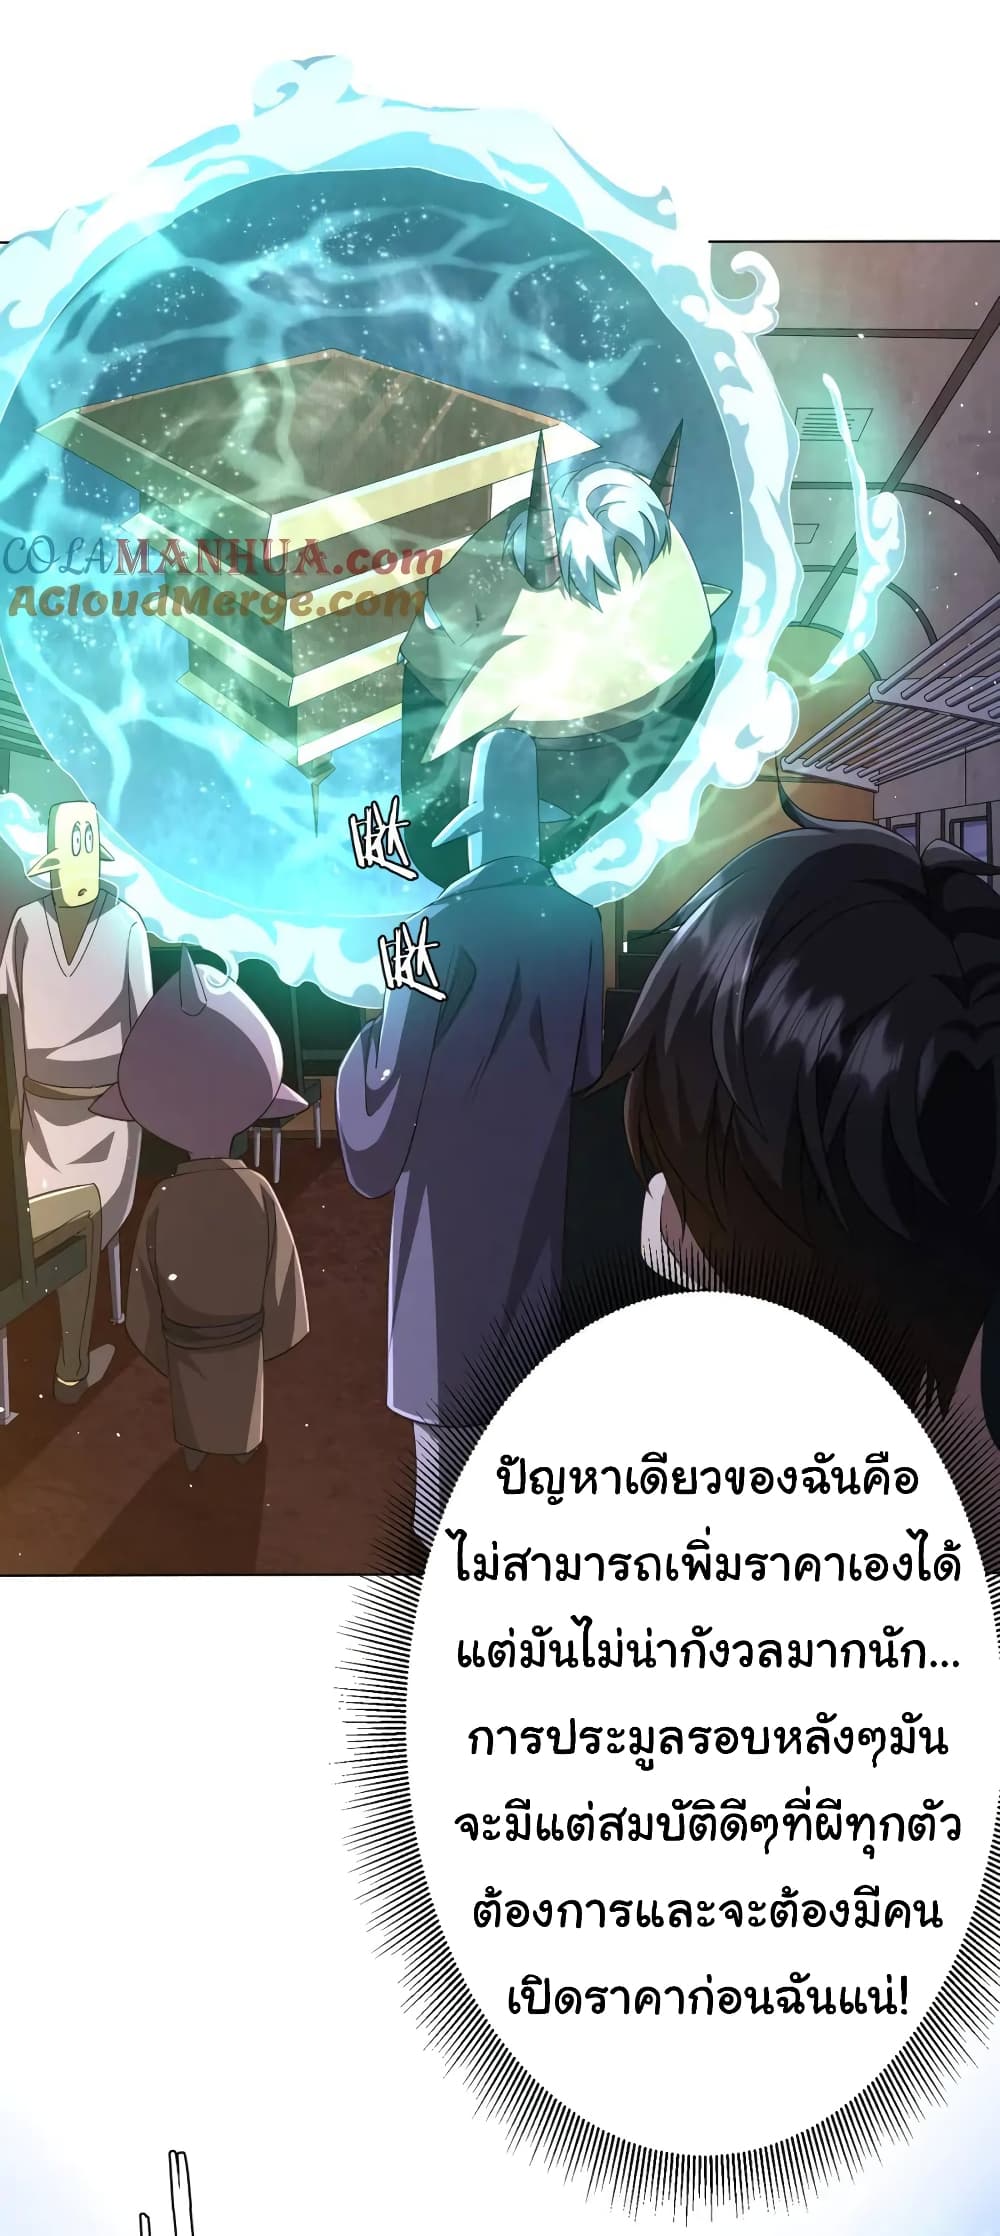 Start with Trillions of Coins ตอนที่ 34 (34)